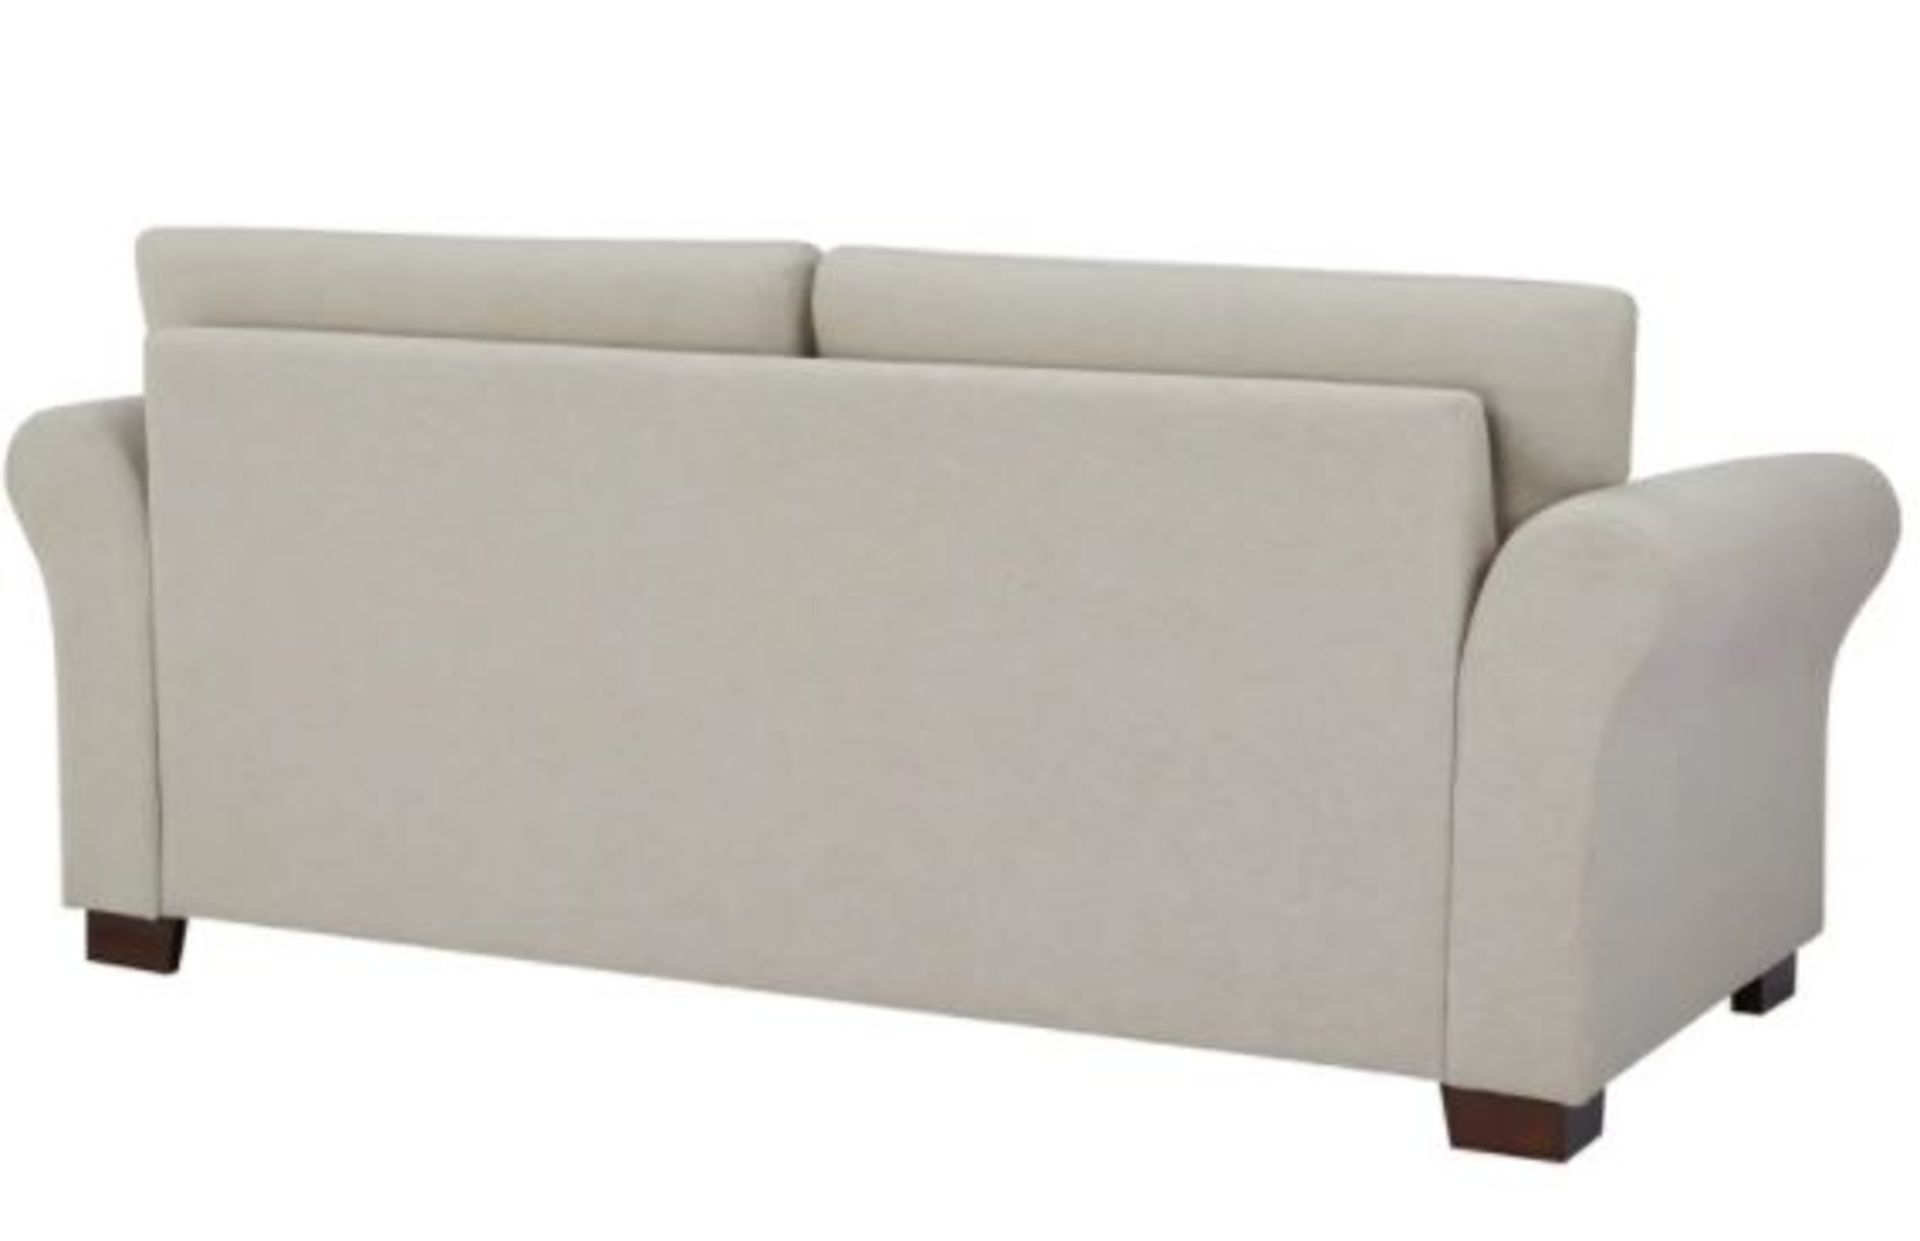 1x Hayley 3 Seater Sofa Natural Slub RRP £500. Pine Wood Frame And Beech Wood Legs. (H)87 x (W)20 - Image 6 of 8